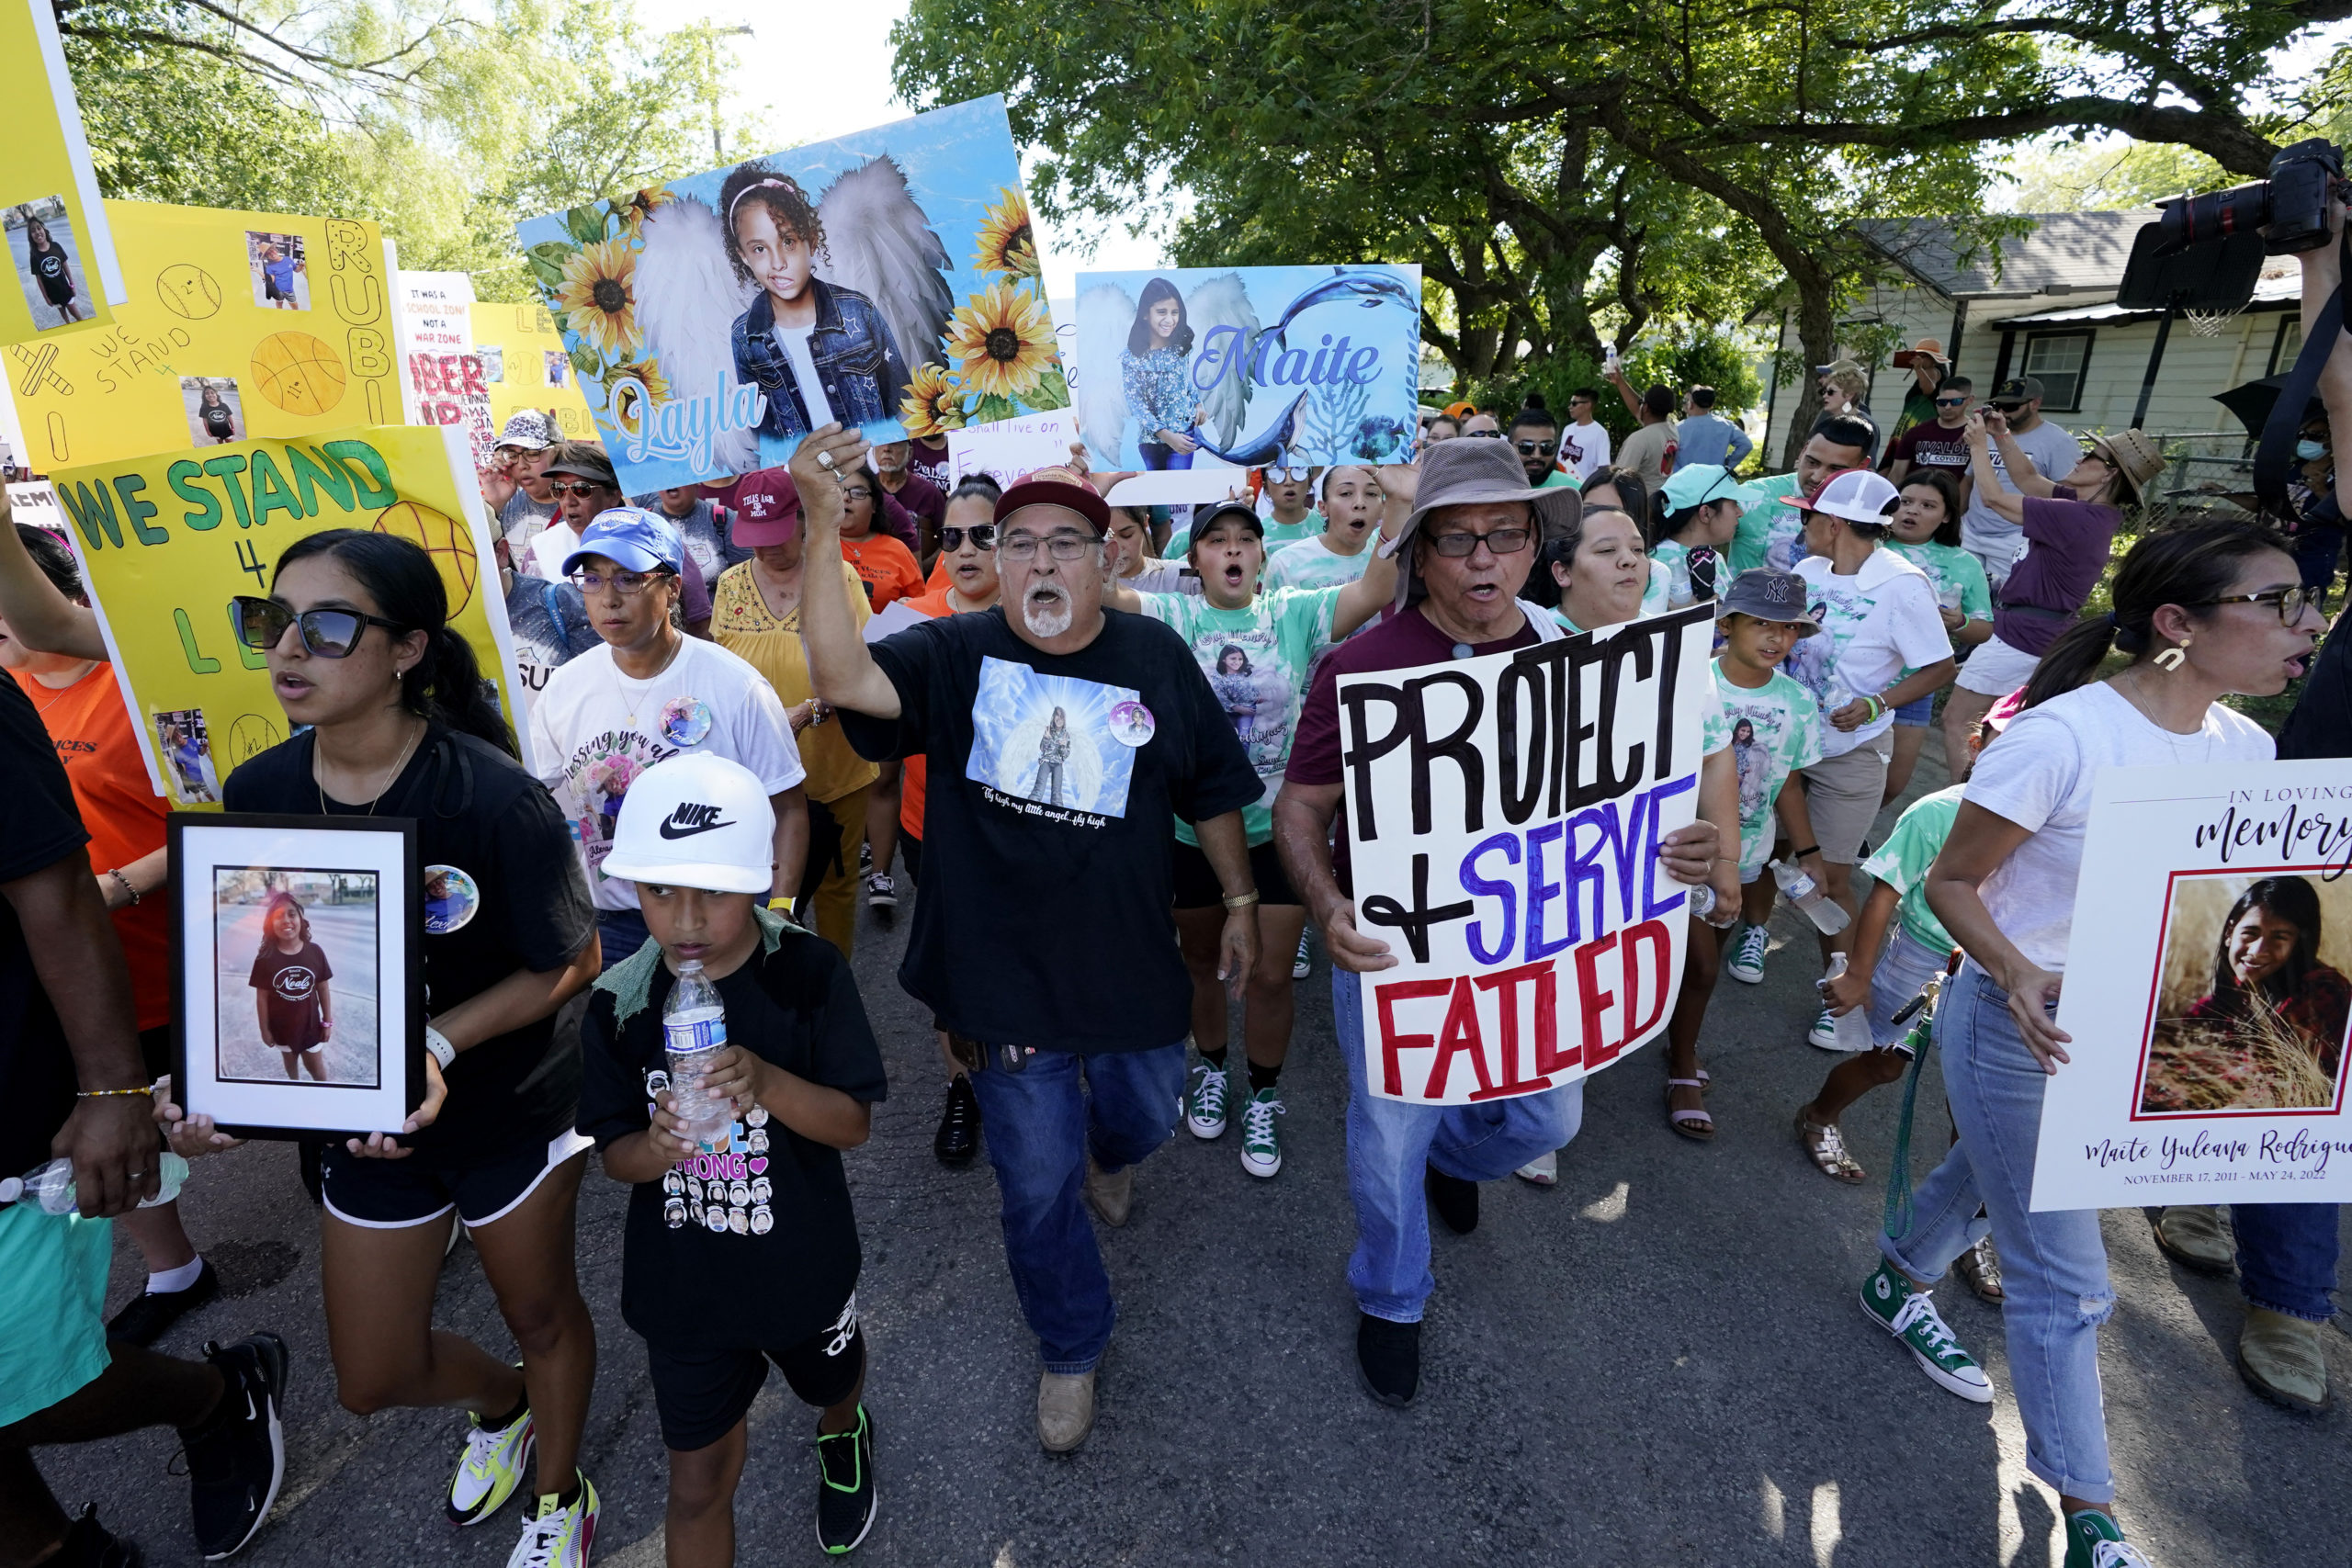 Family and friends of those killed and injured in the school shooting at Robb Elementary took part in a protest march and rally, Sunday in Uvalde, Texas.